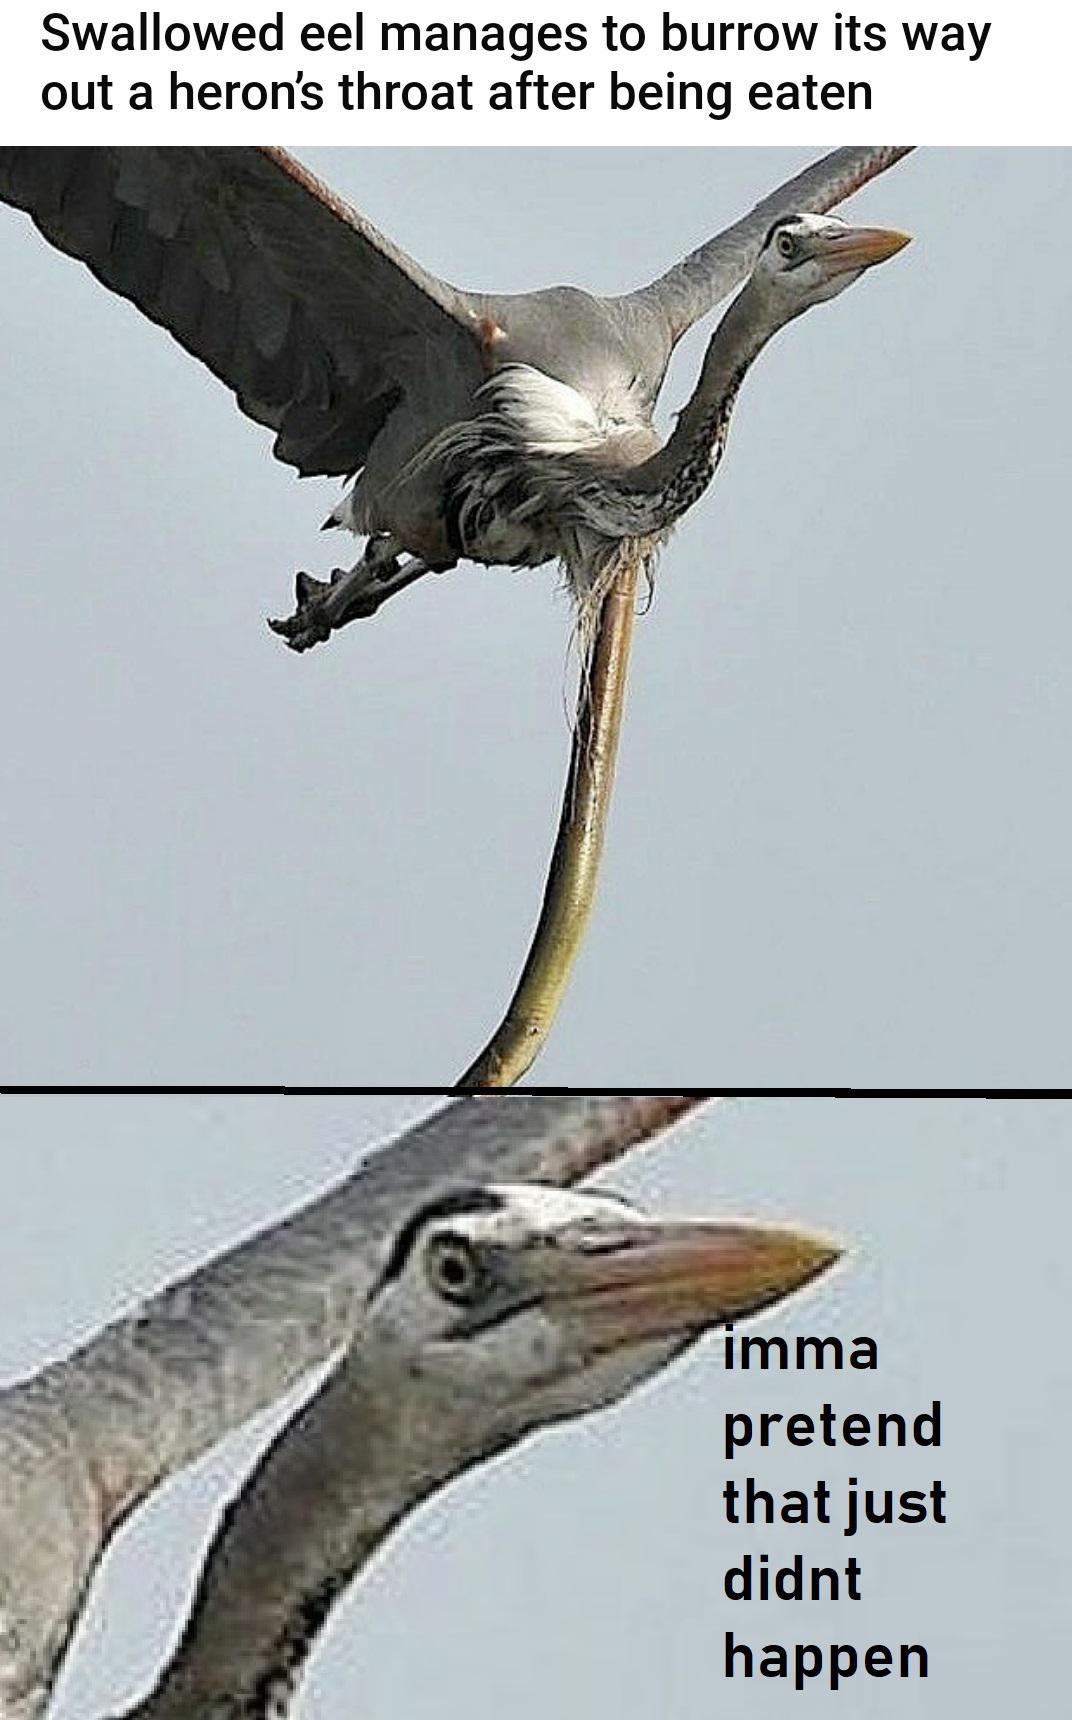 dank memes - funny memes - Swallowed eel manages to burrow its way out a heron's throat after being eaten imma pretend that just didnt happen